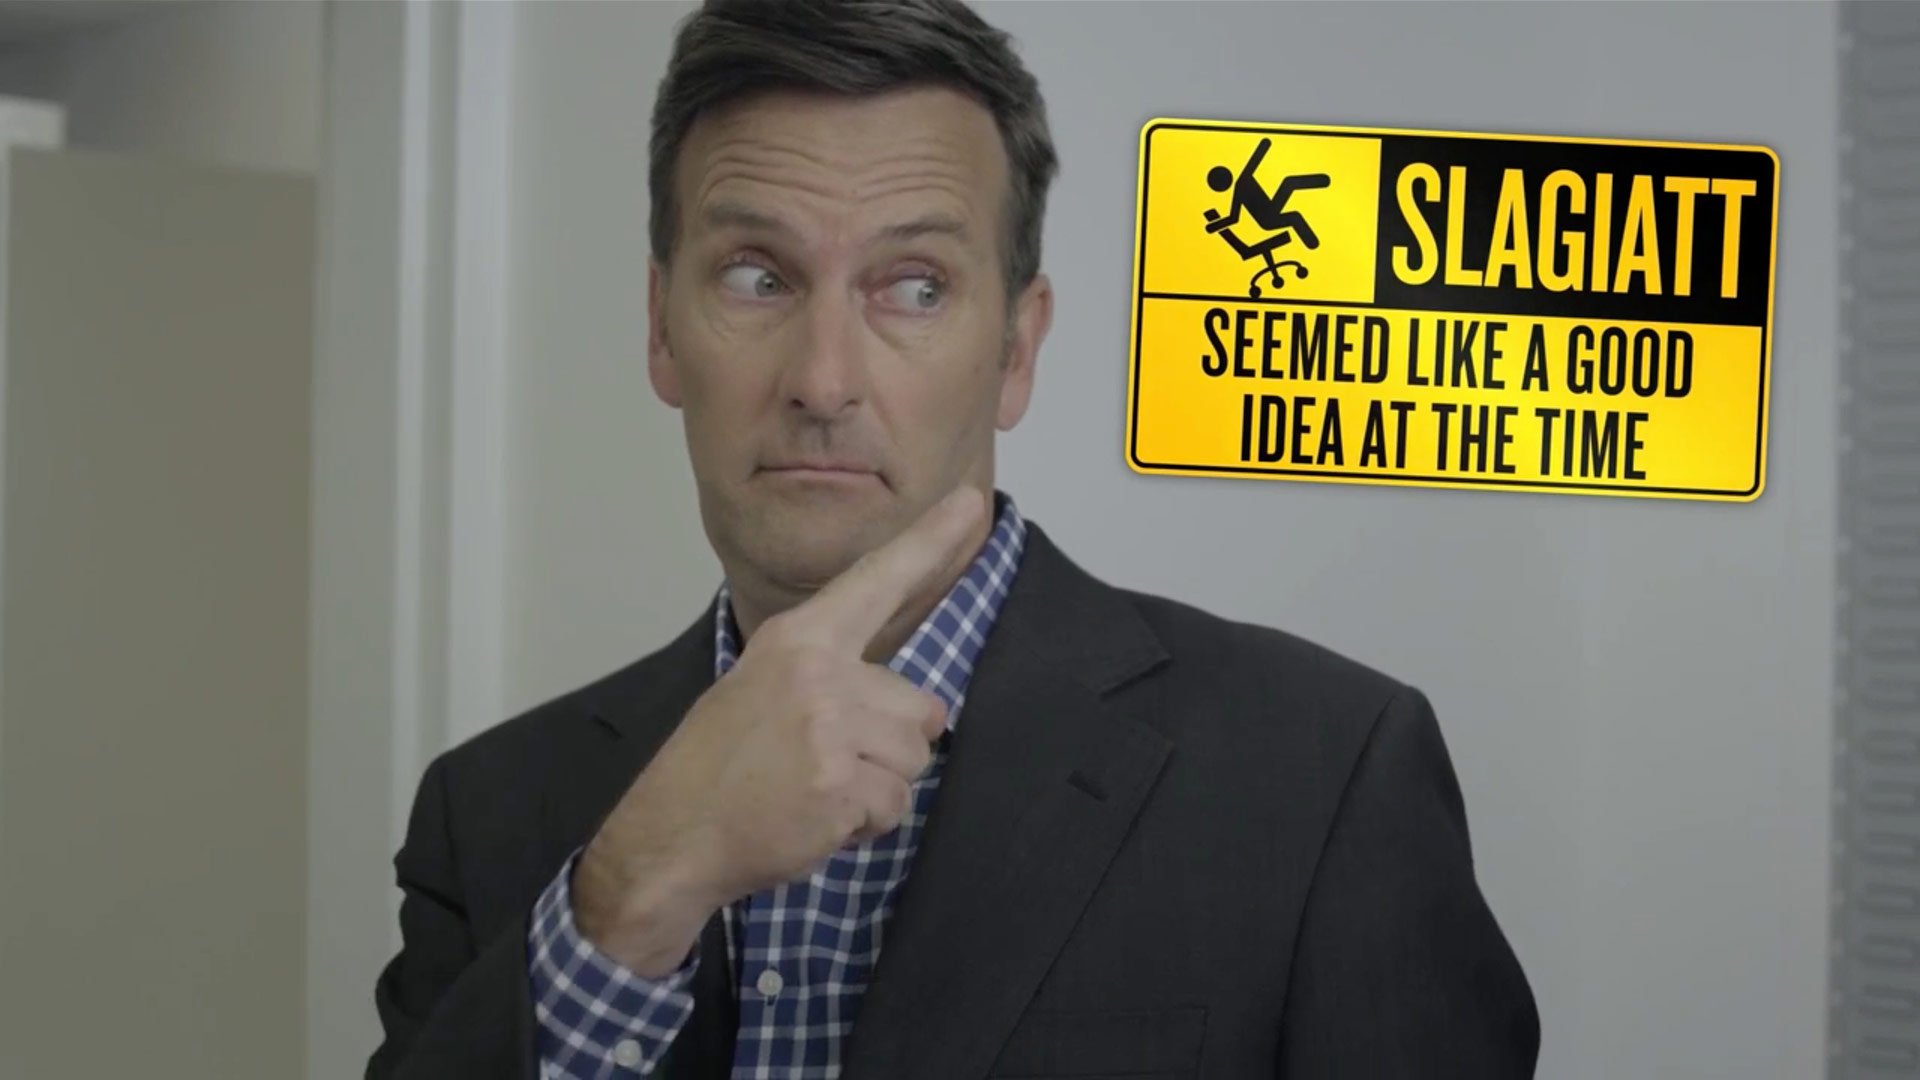 Still from video Campaign ad: SLAGIATT - Seemed like a good idea at the time